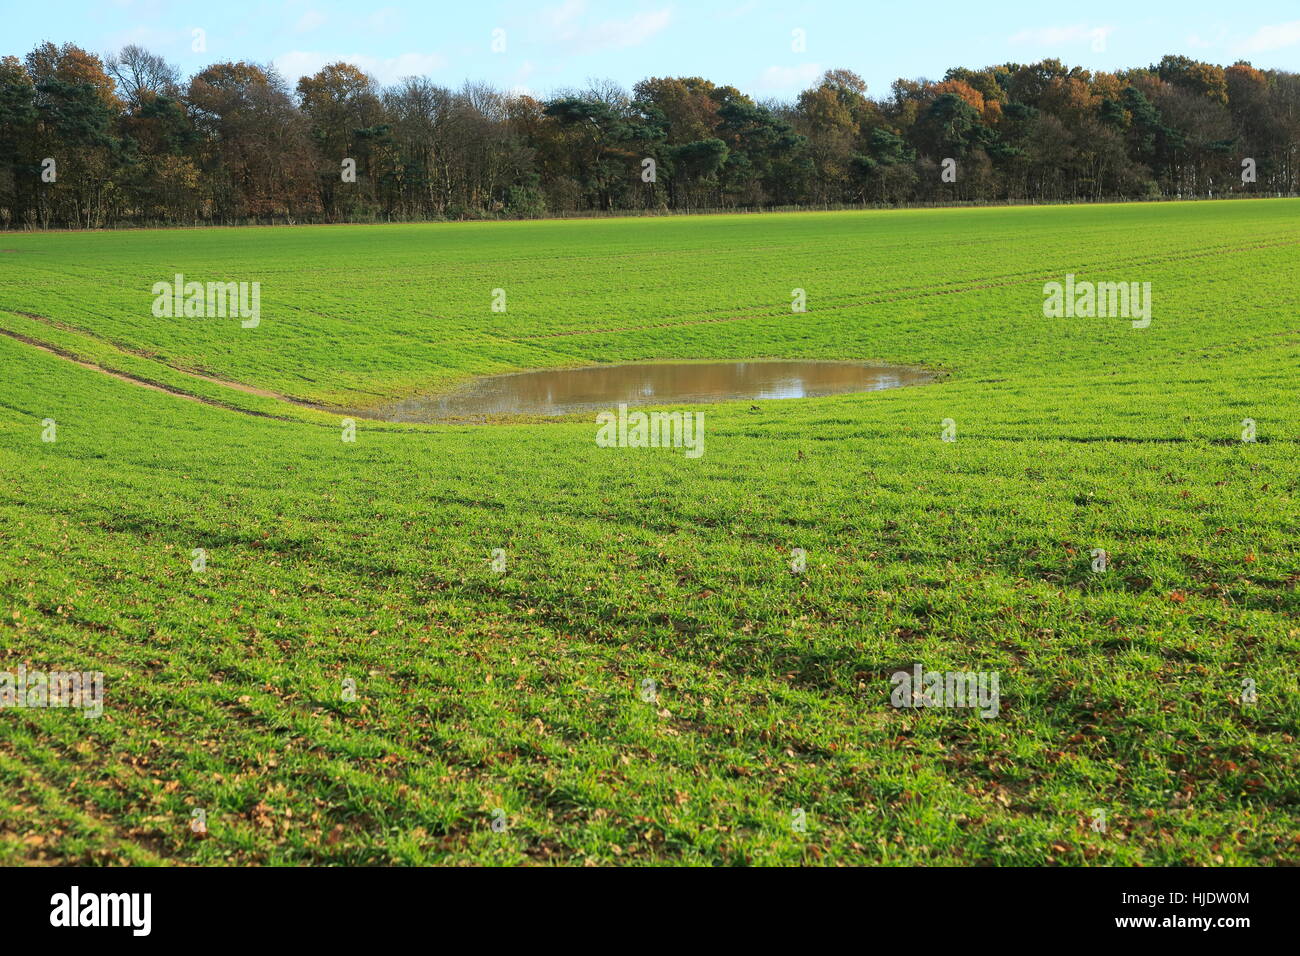 Temporary water pool in field depression showing level of water table, Ramsholt, Suffolk, England, UK Stock Photo